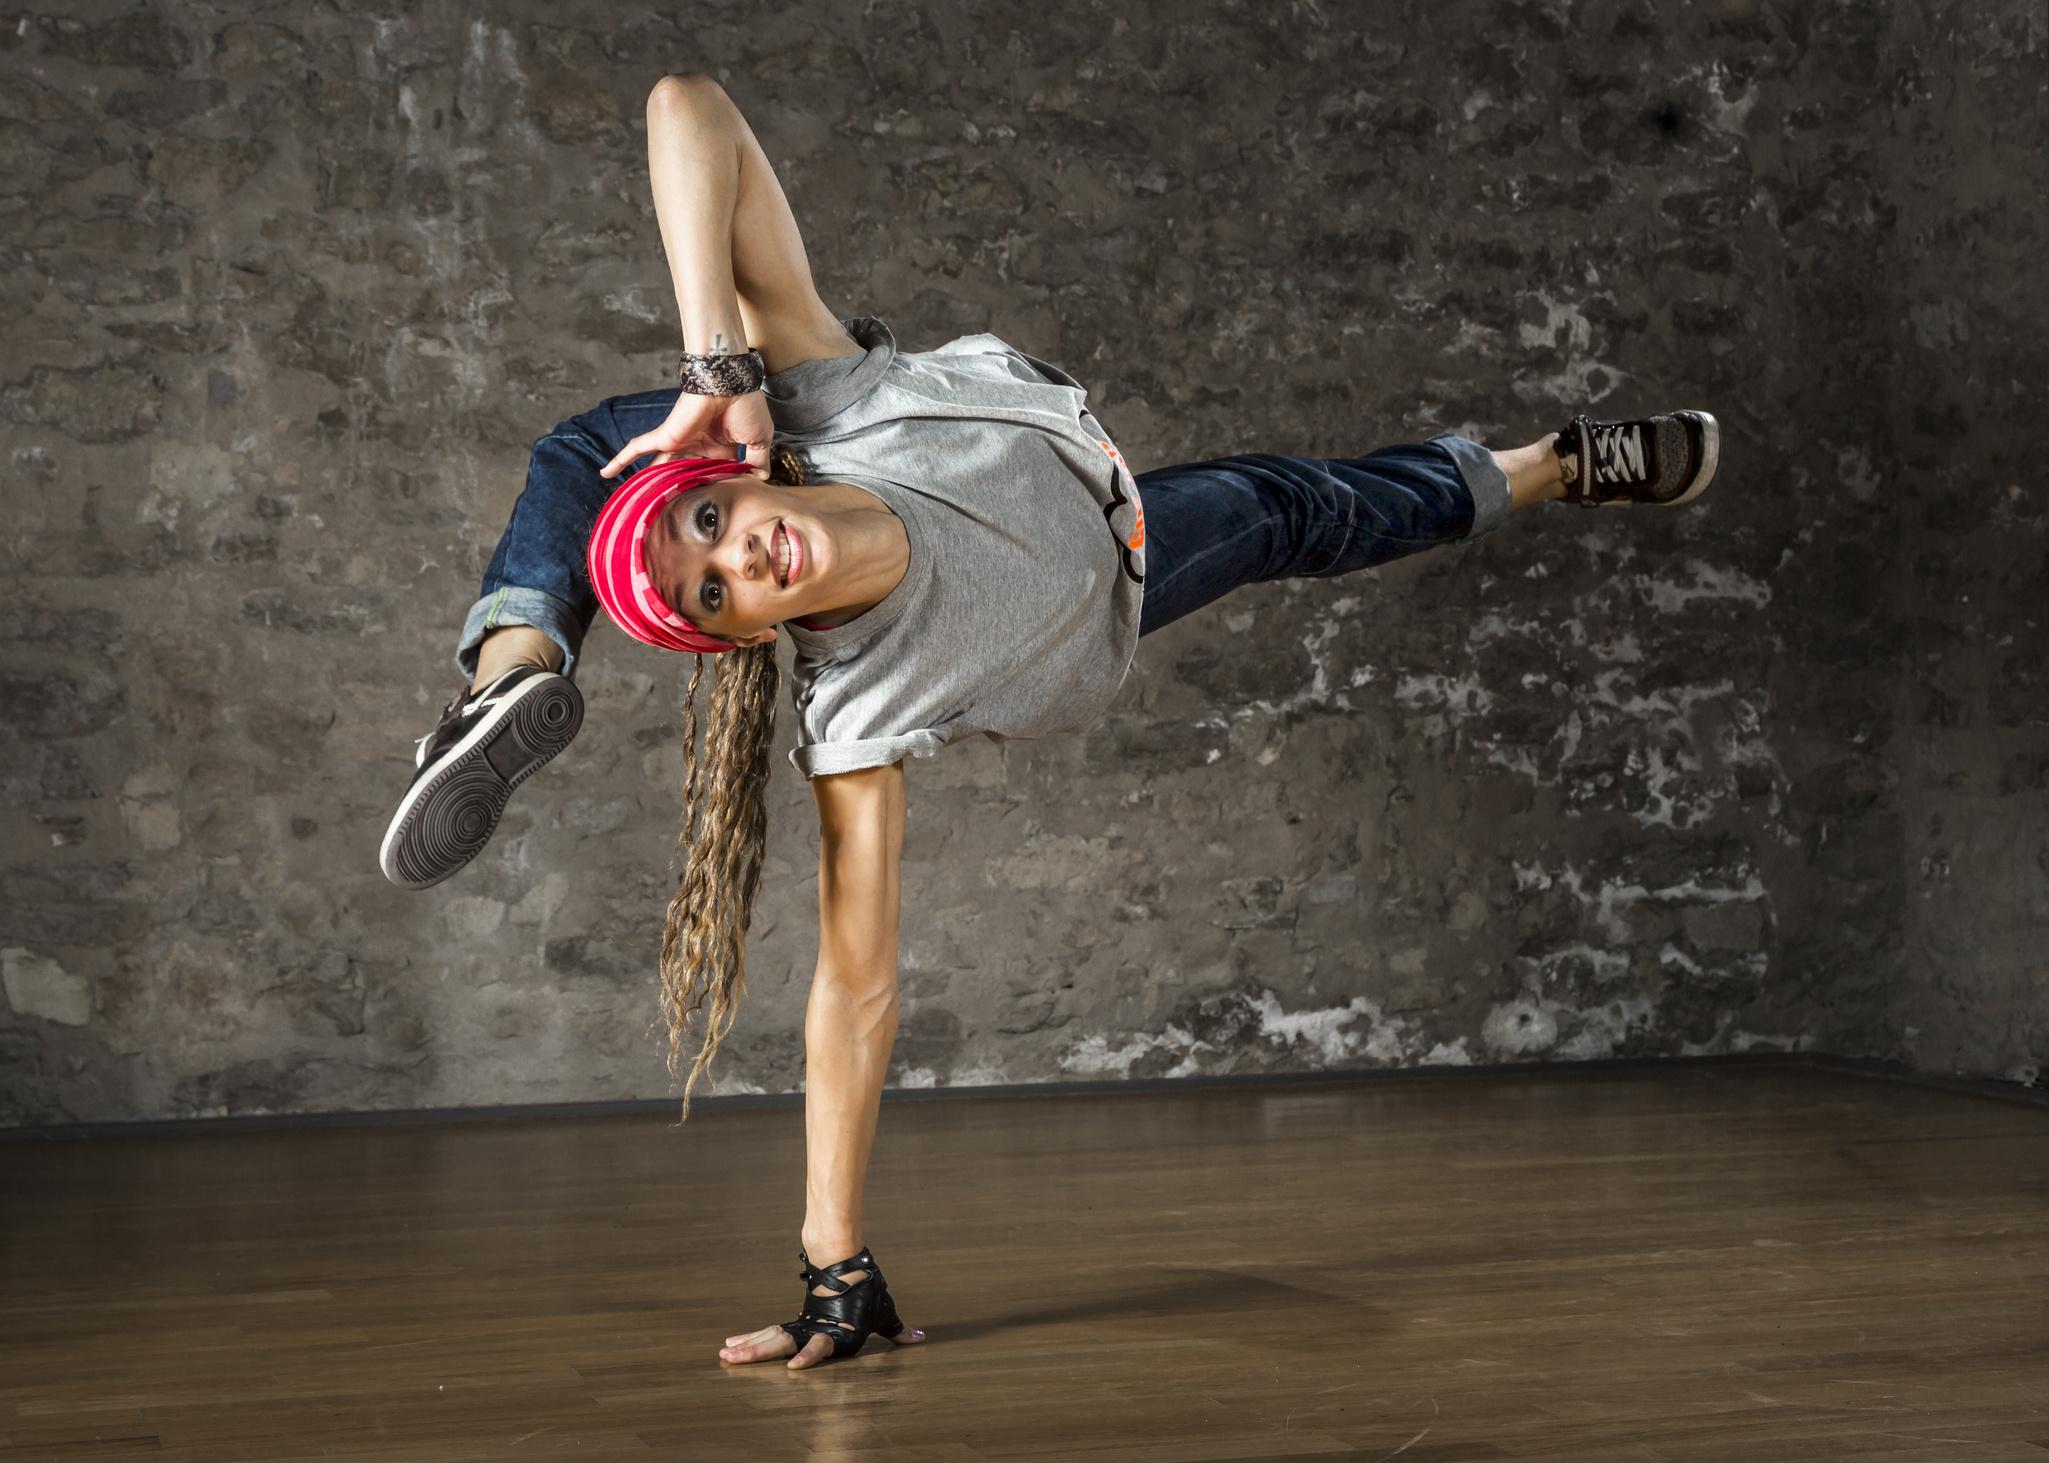 Street Dance: Hip hop dance, Powerful genre, A style that improvisational and social in nature. 2050x1470 HD Wallpaper.